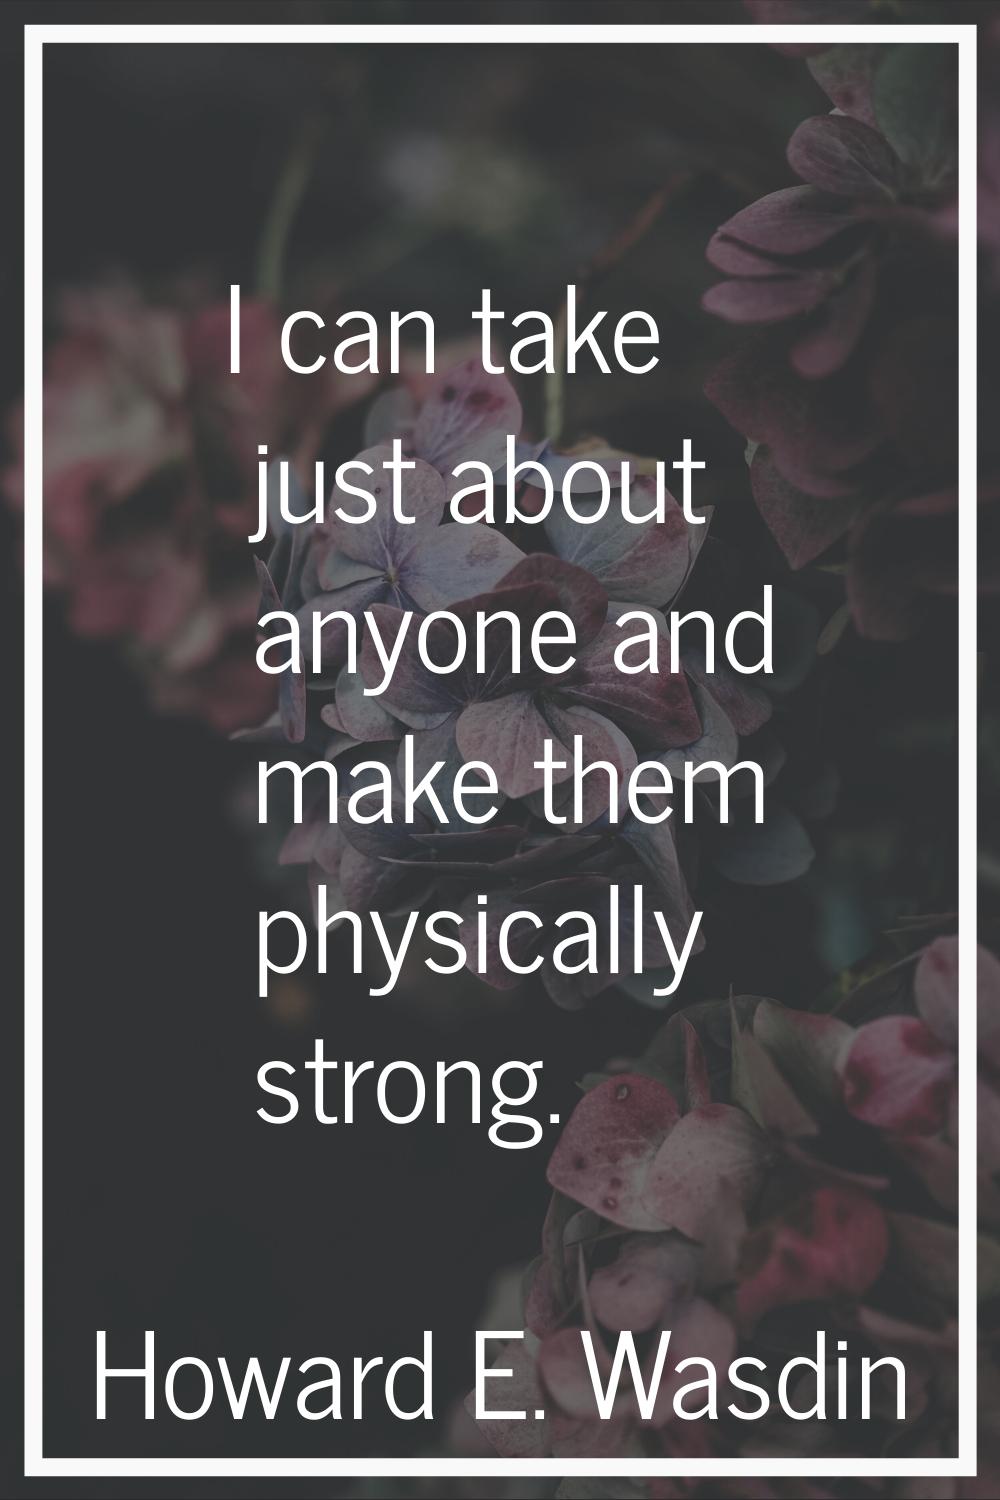 I can take just about anyone and make them physically strong.